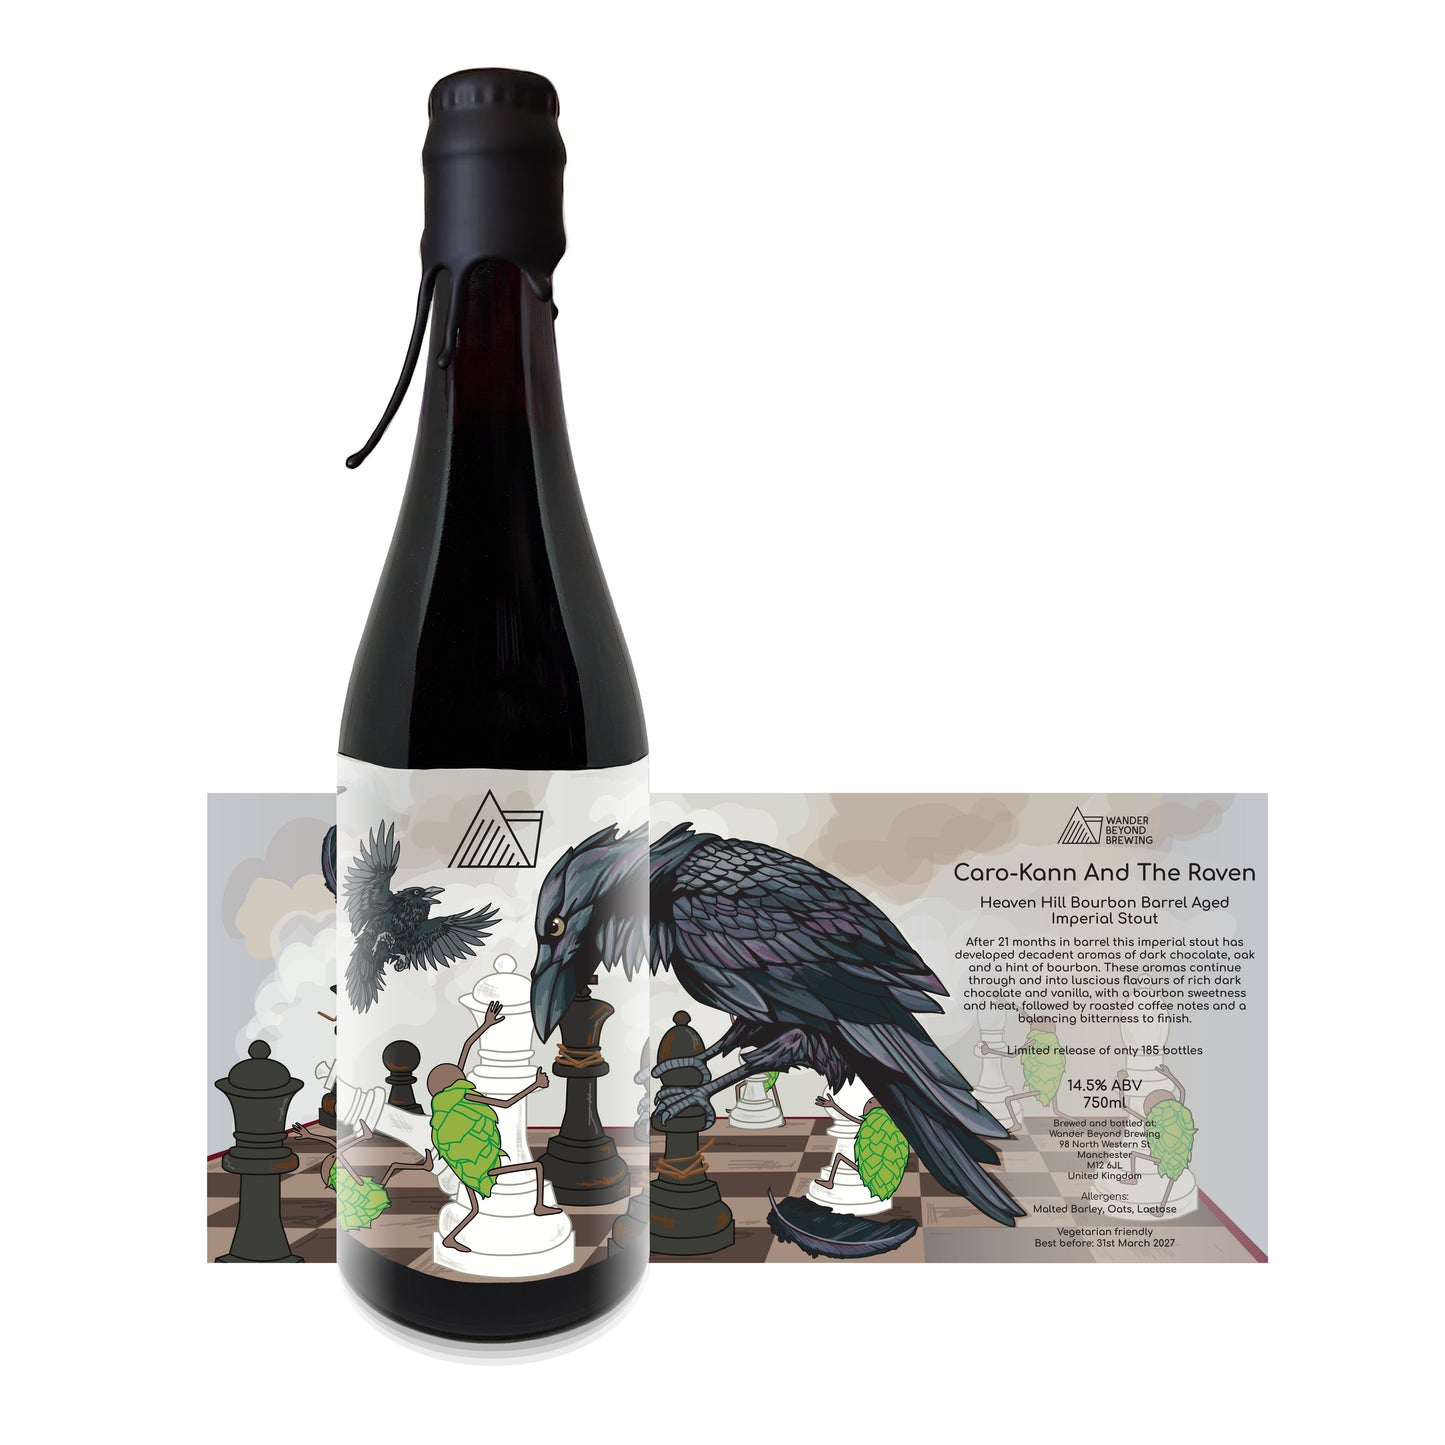 Caro-Kann And The Raven - Heaven Hill Bourbon Barrel Aged Imperial Stout